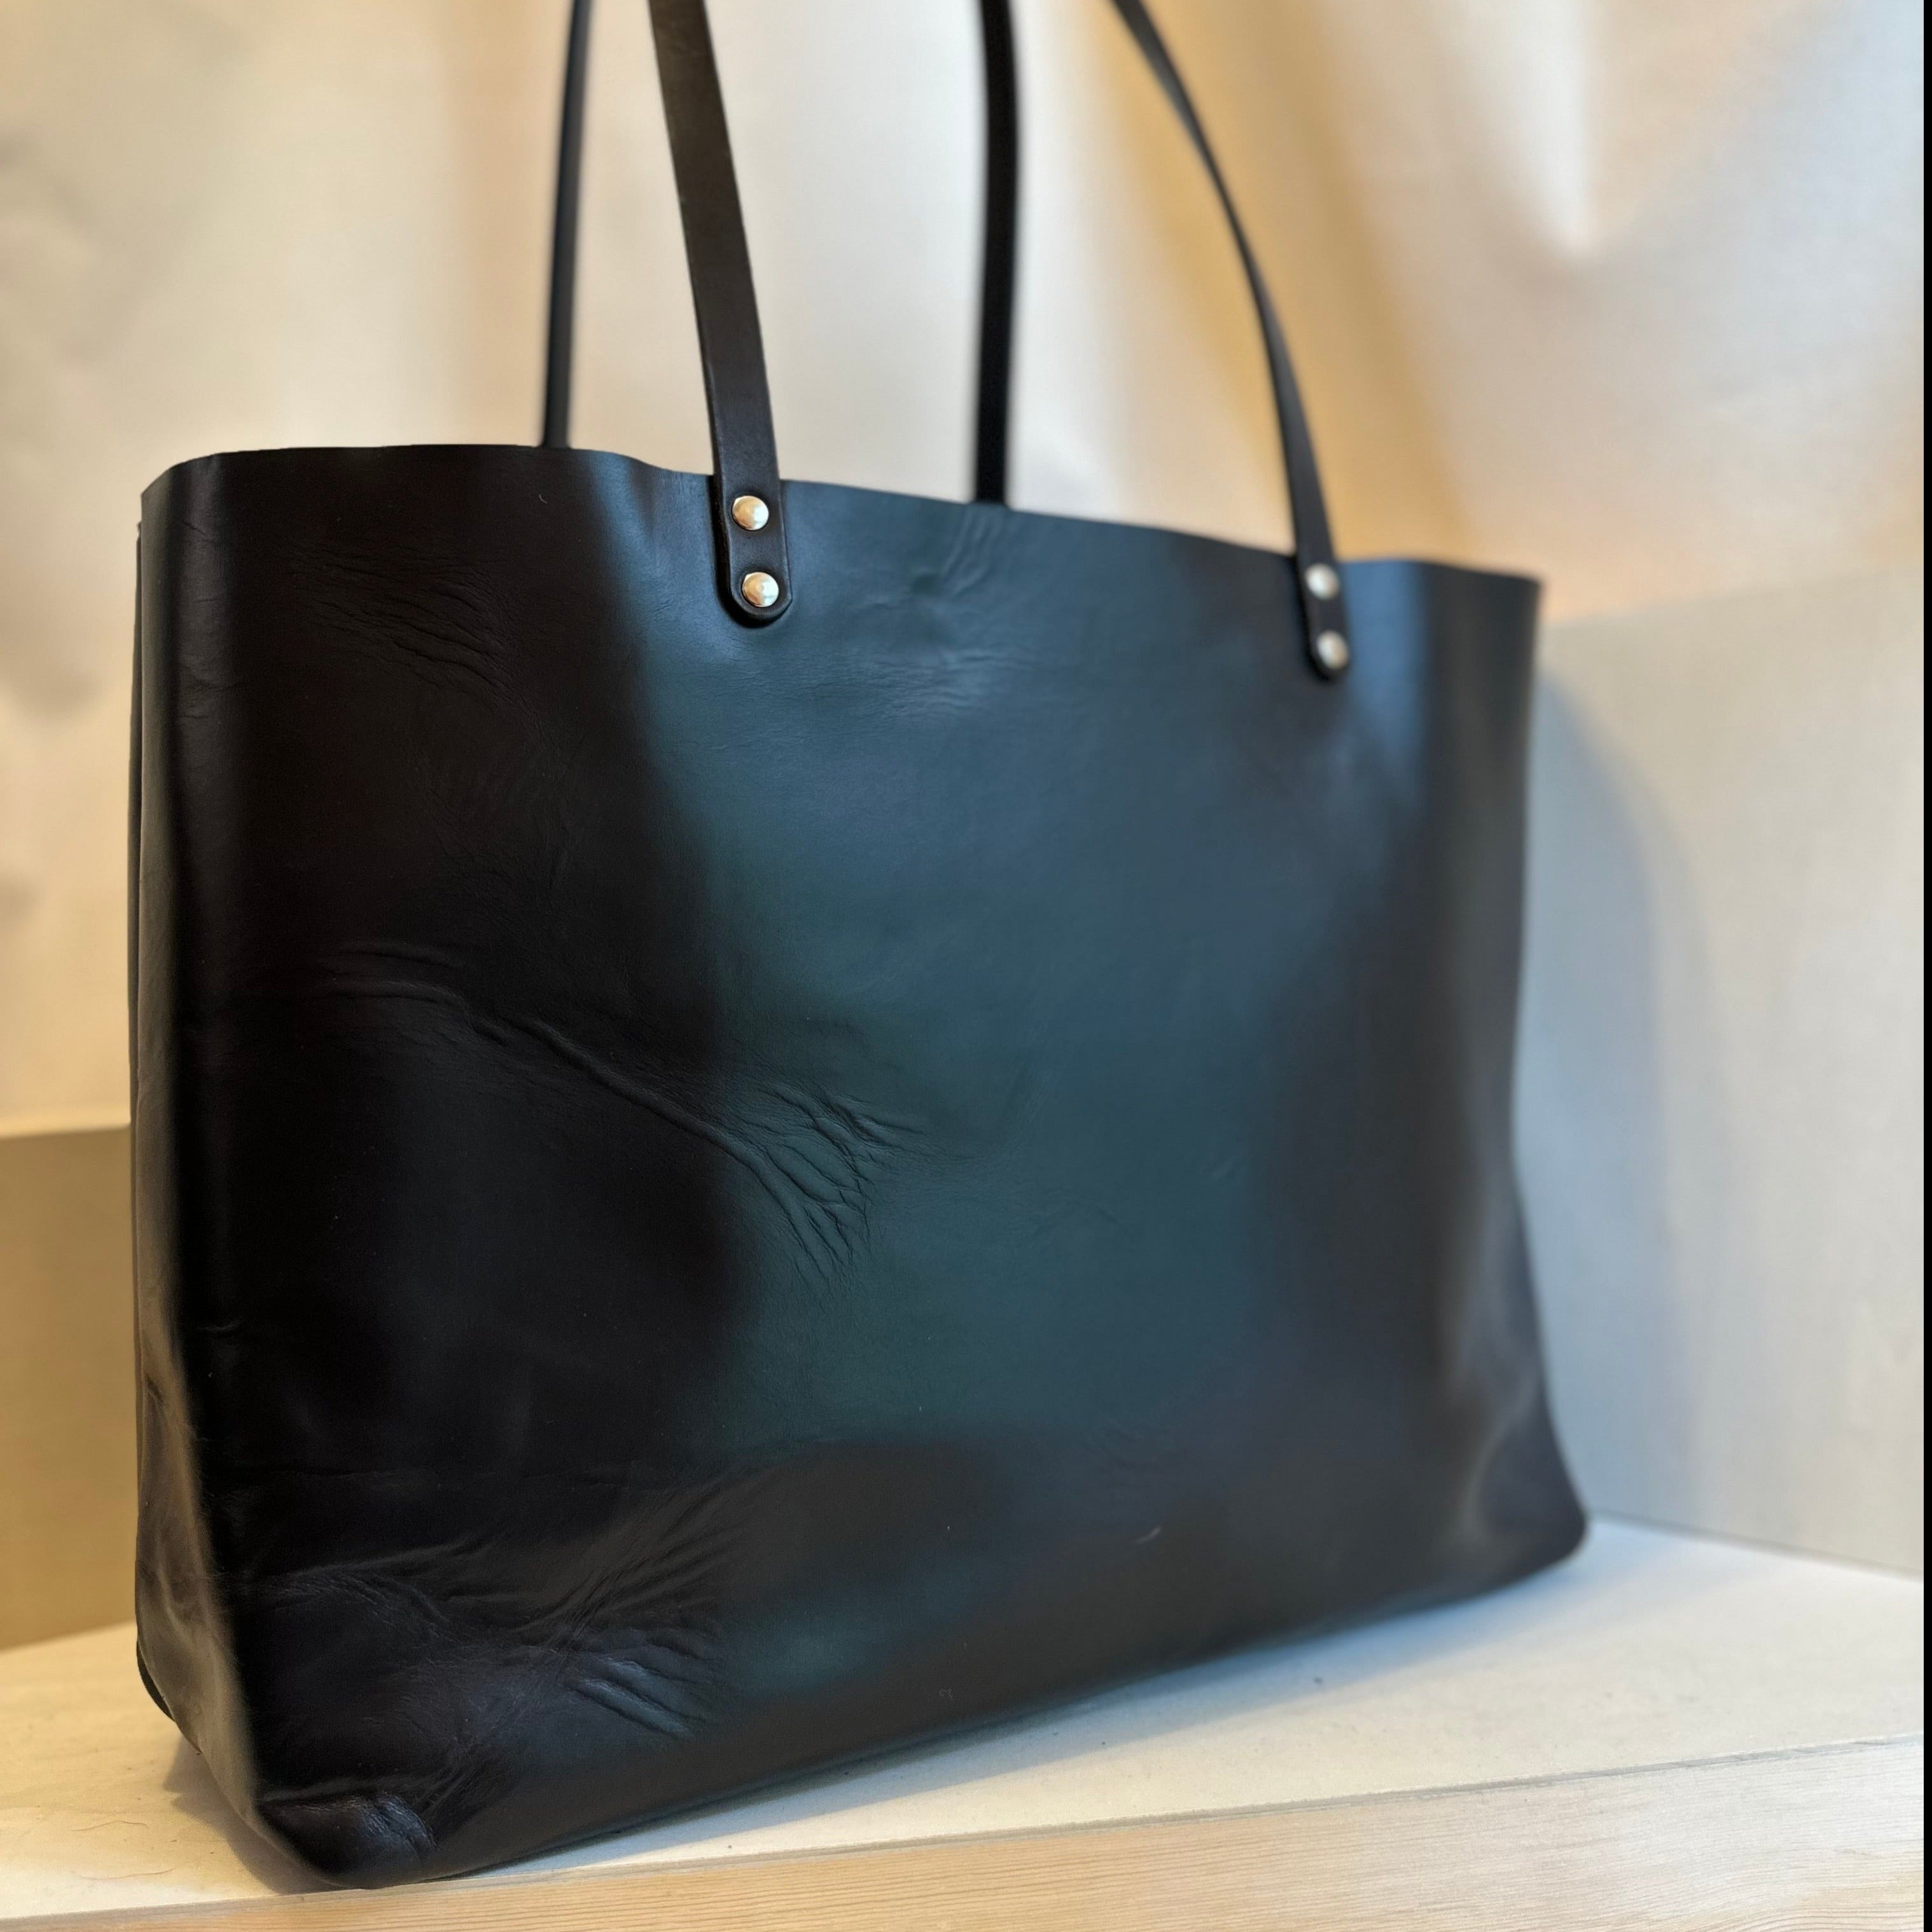 The Shining Rock Goods First Class LX Black Leather Tote Bag is crafted from top grain Horween Chrome XL, USA tanned leather, is designed for maximum longevity and the quietest of luxury.